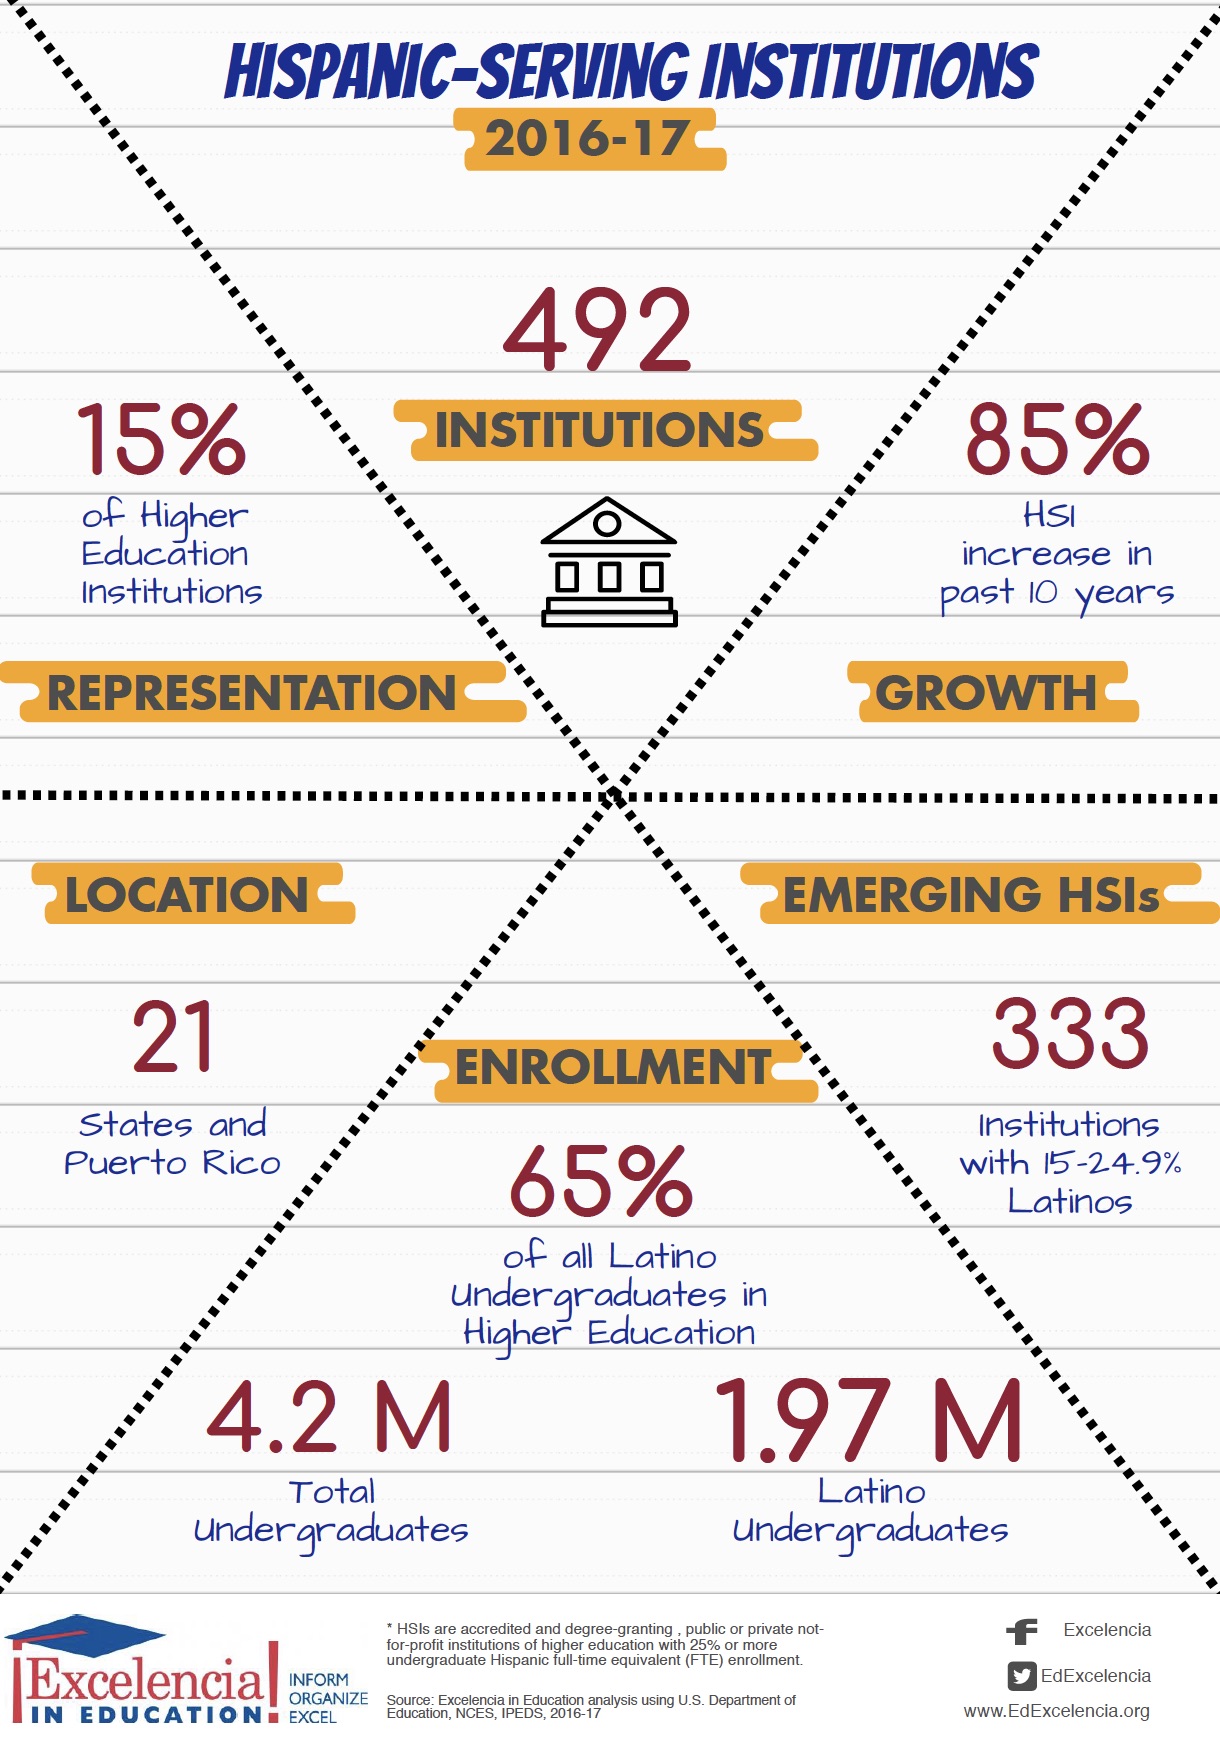 Infographic - Hispanic-Serving Institutions (HSIs) 2016-2017 (JPG)